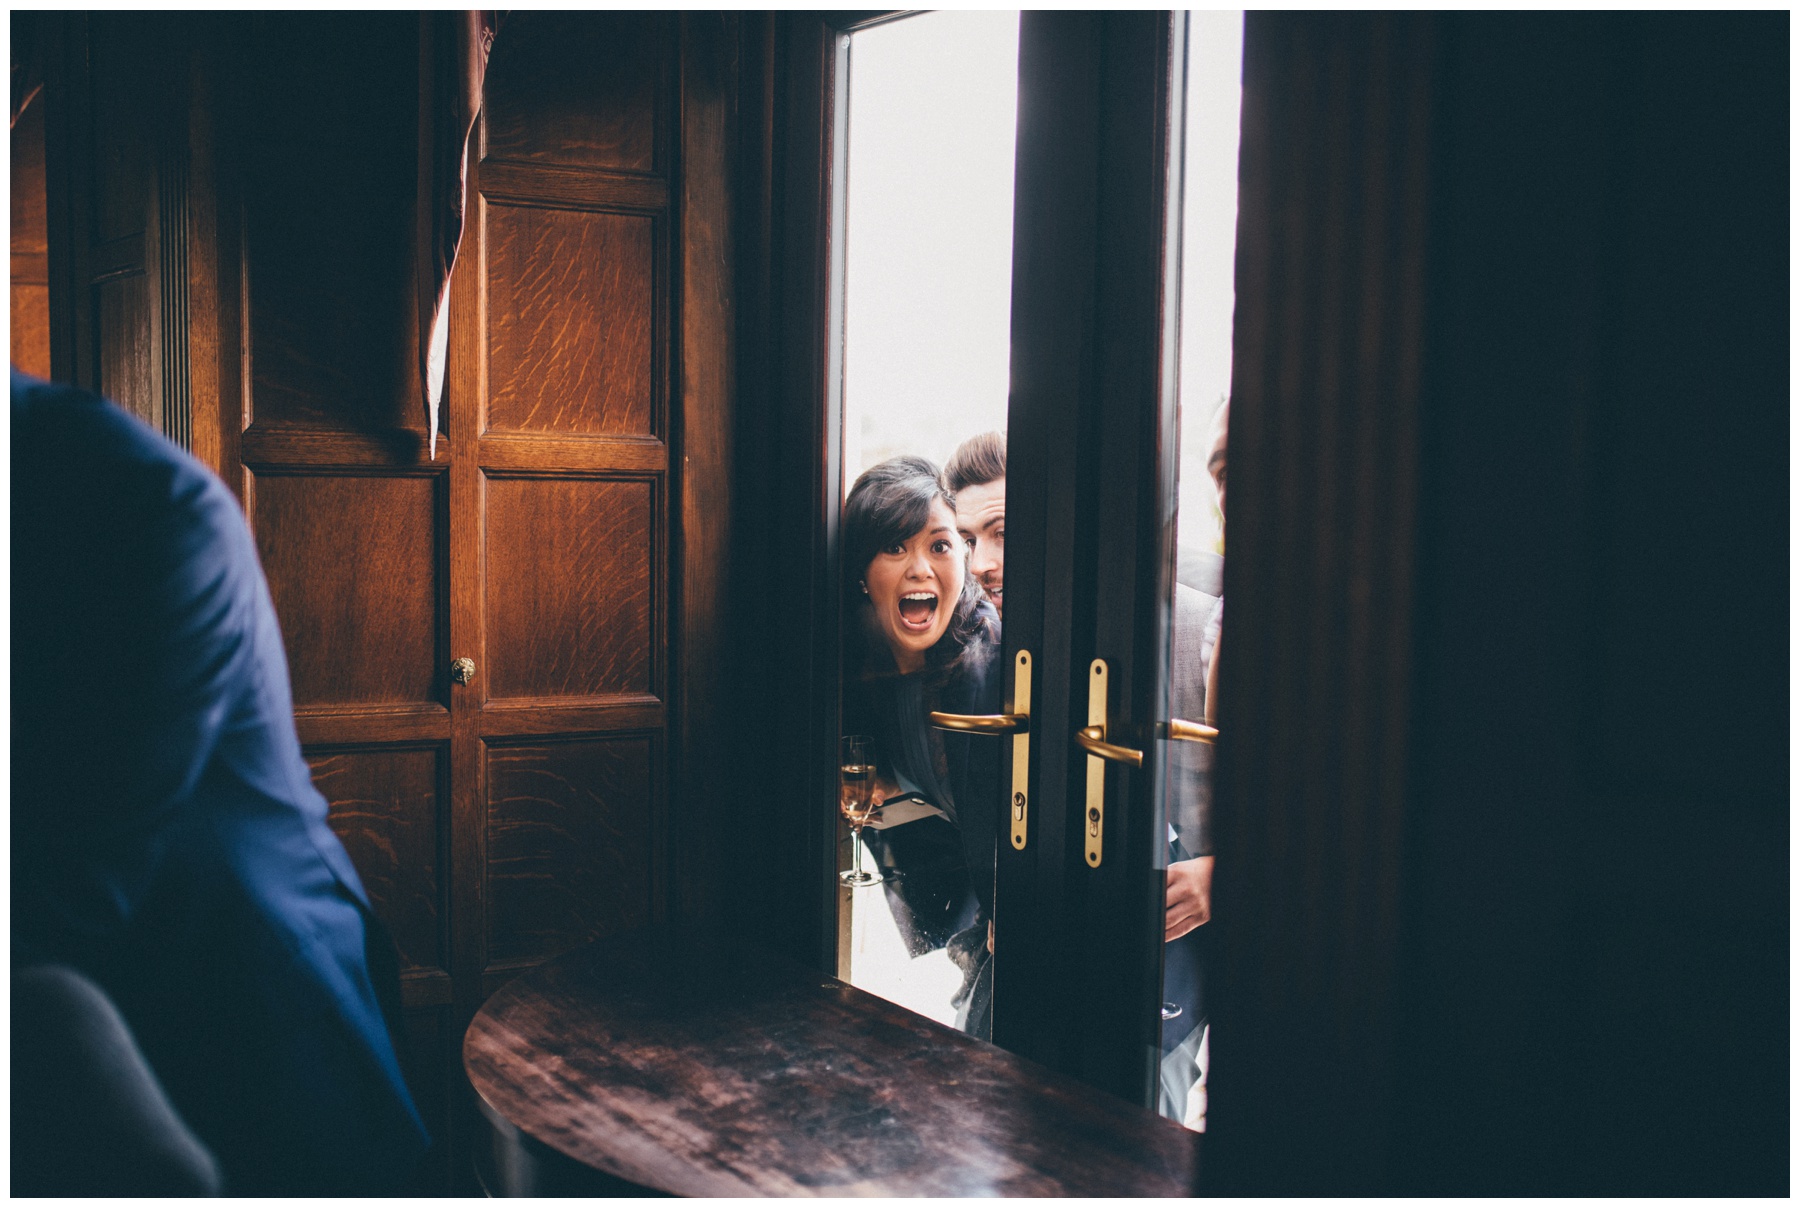 Family members make wedding guests laugh through the window at Langdale Chase hotel in the Lake District.